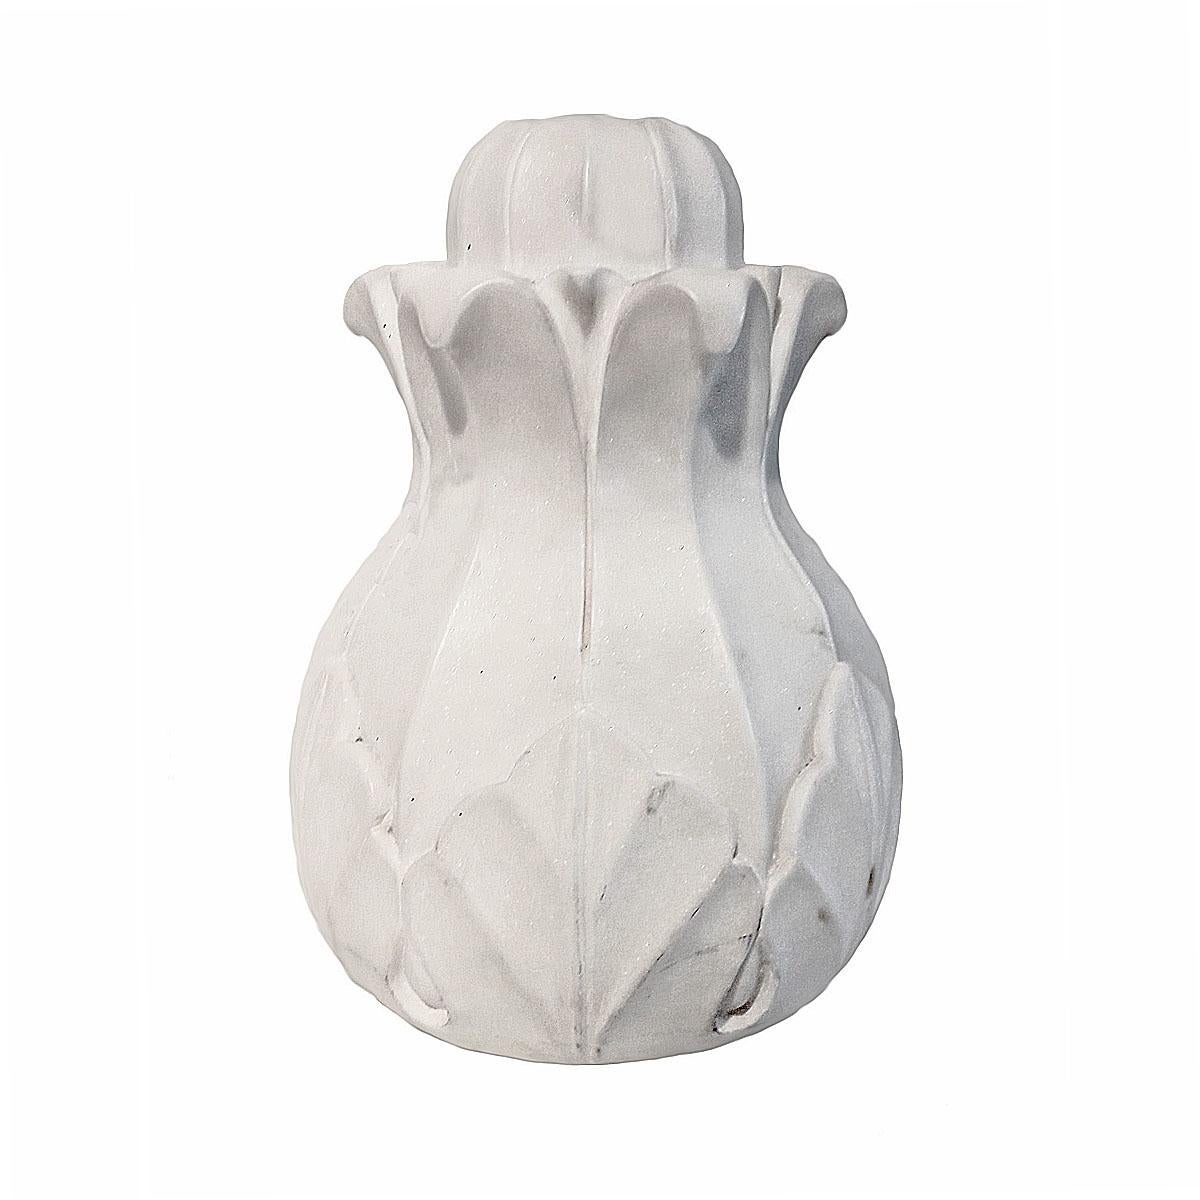 A Fountain element in white statuary marble. India, circa 1980. 
Intricately hand-carved in a leaf pattern, with a narrow opening from top to bottom that allows water to flow through as a fountain base. 

Two available, sold separately.

As outdoor